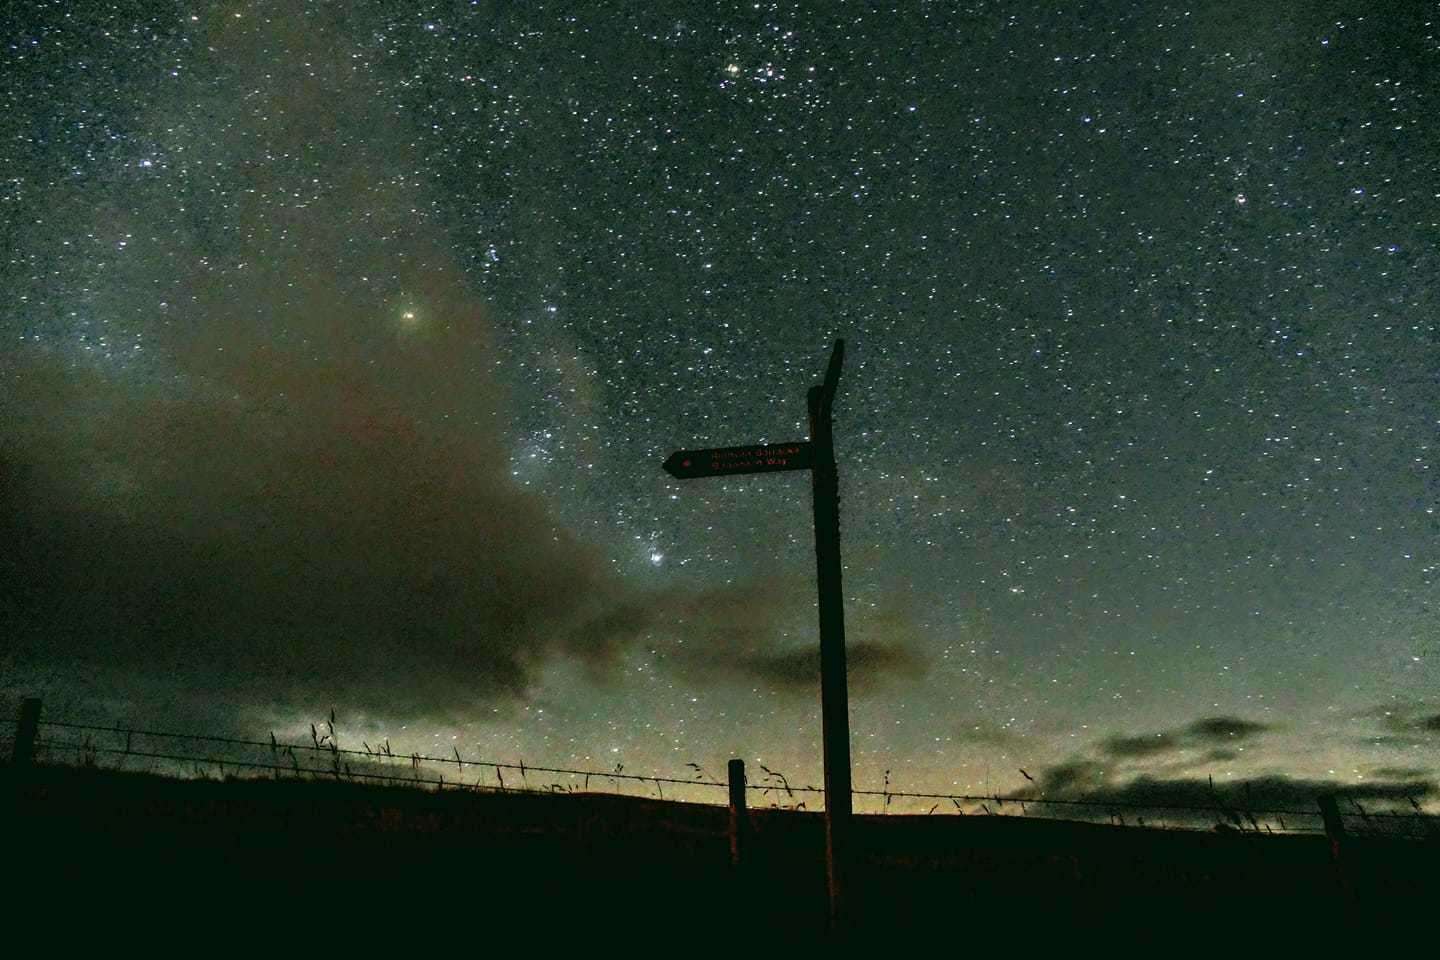 The study hopes to help protect the night sky and find the best places for star spotters to visit. Picture: David Macleod.